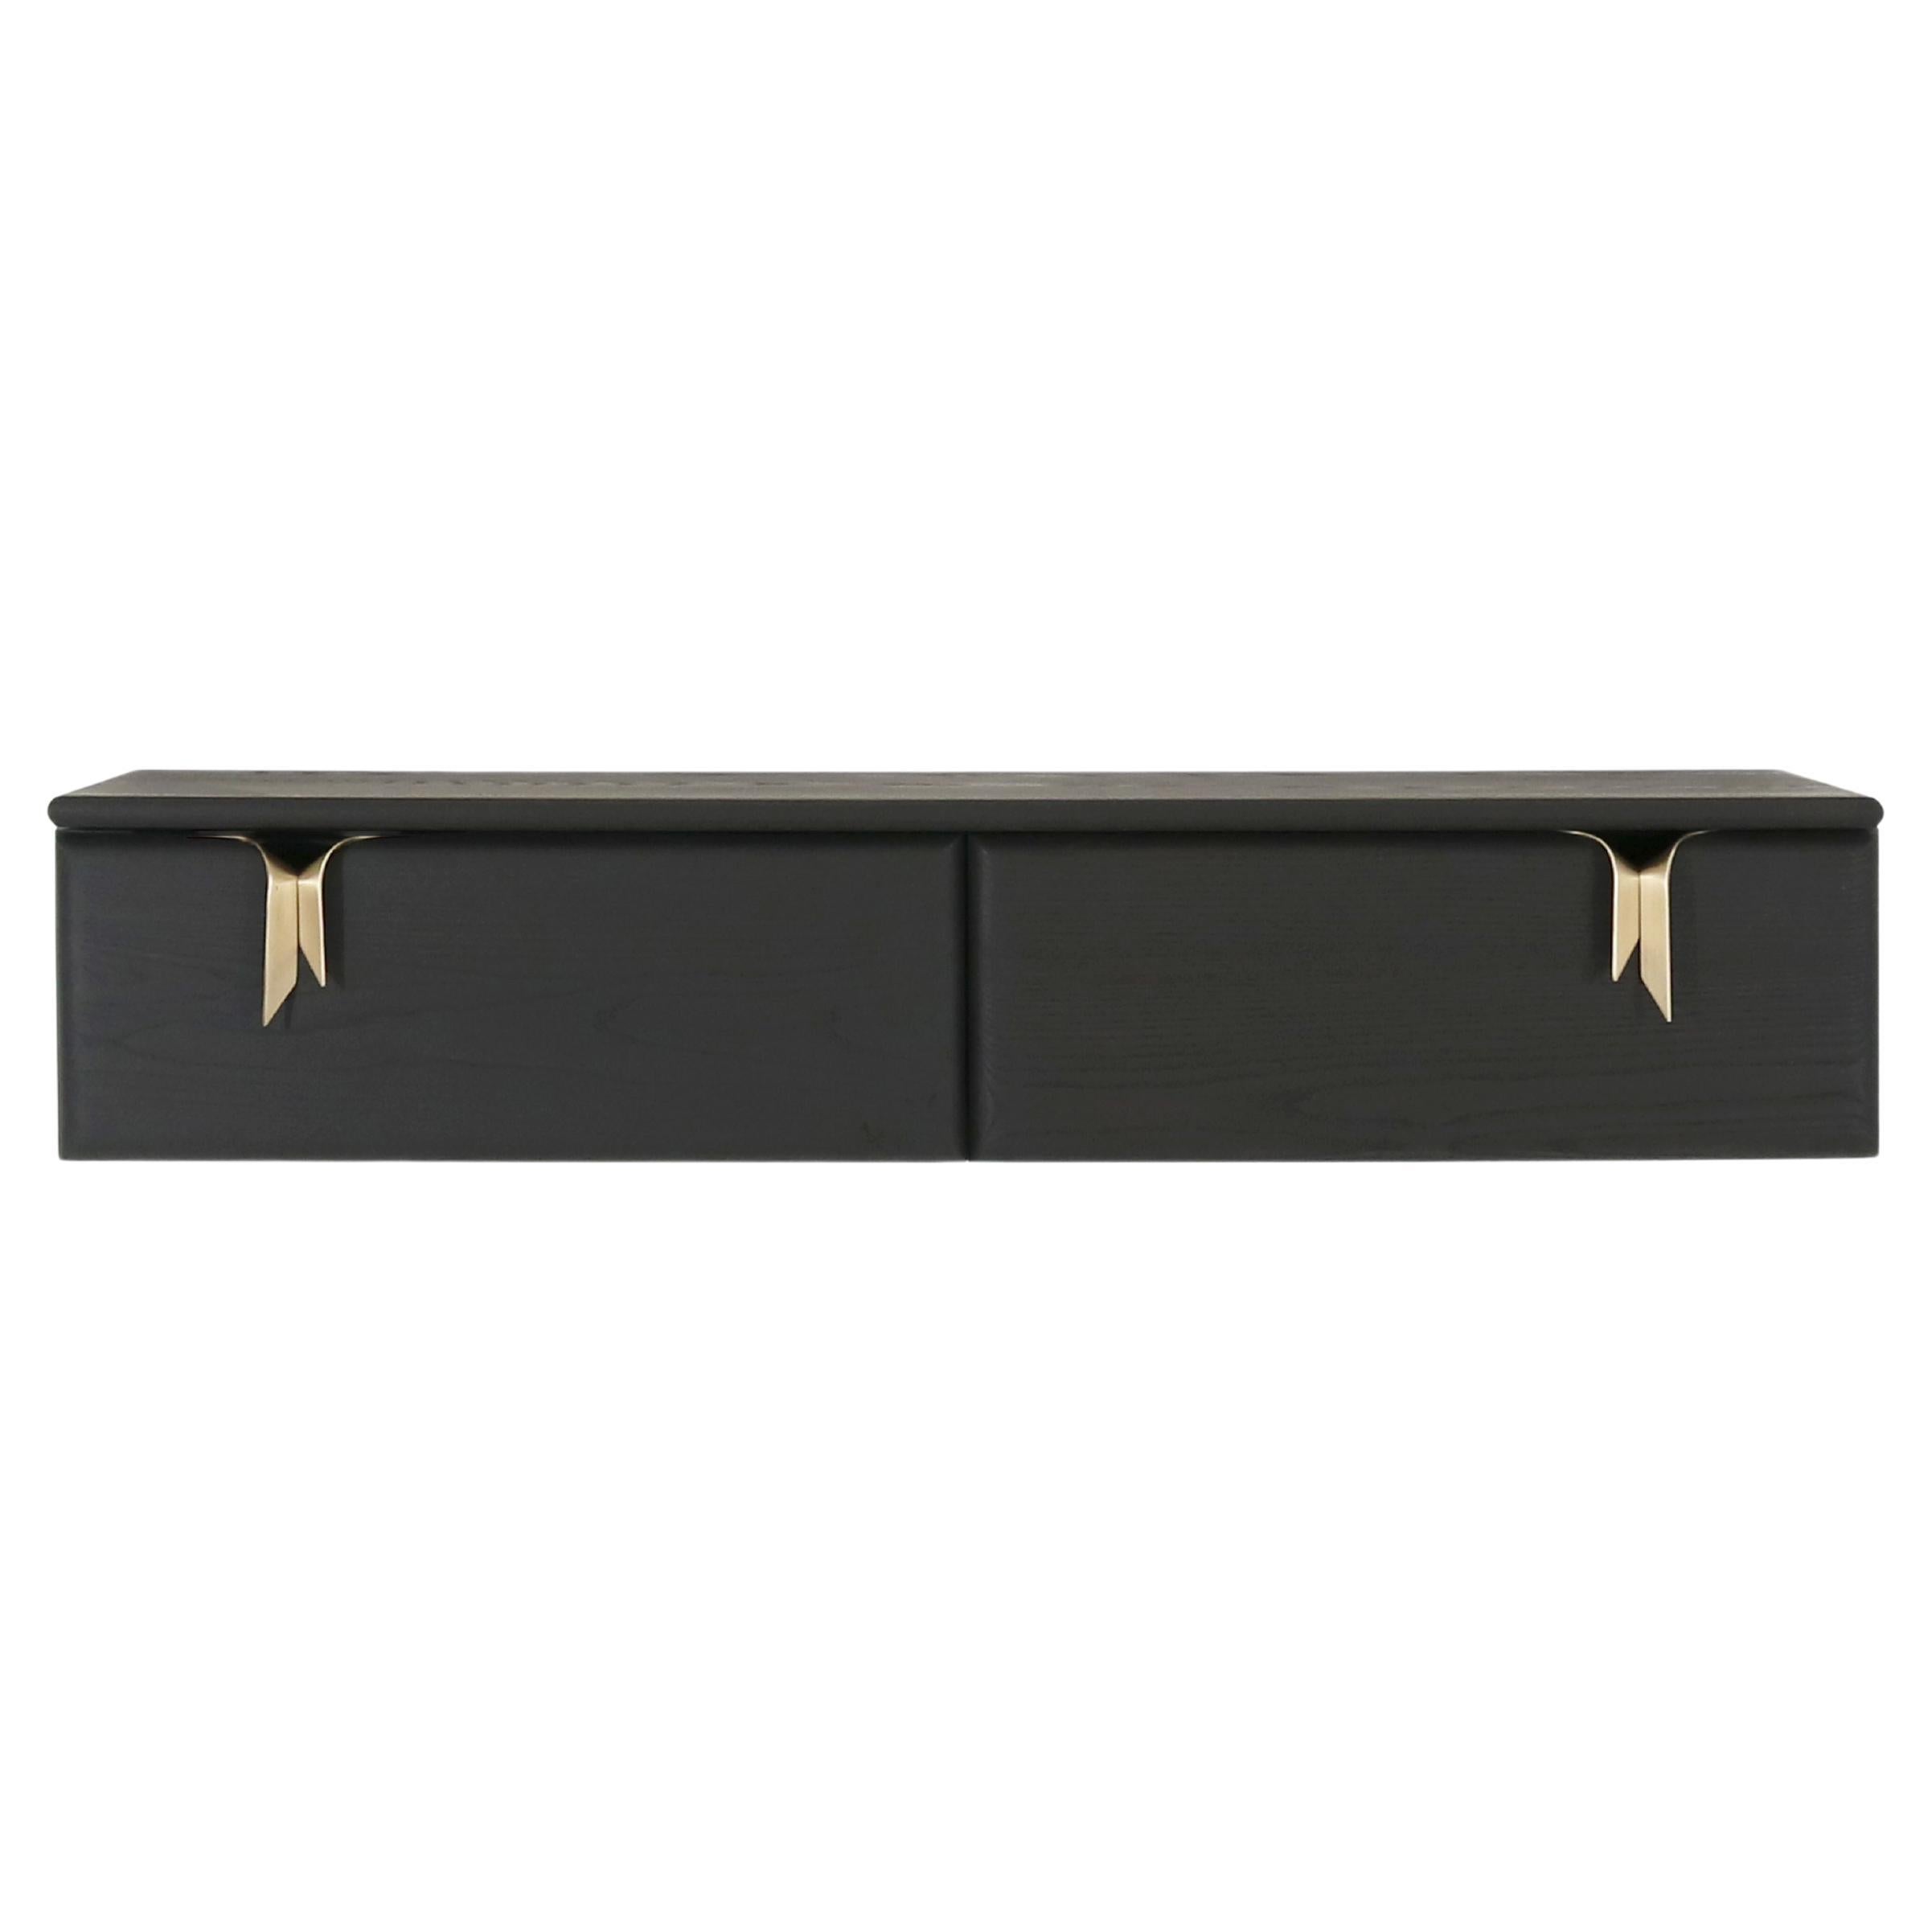 Wall Mounted Console, Black Ash Wood & Bronze Ribbon Hardware by Debra Folz For Sale